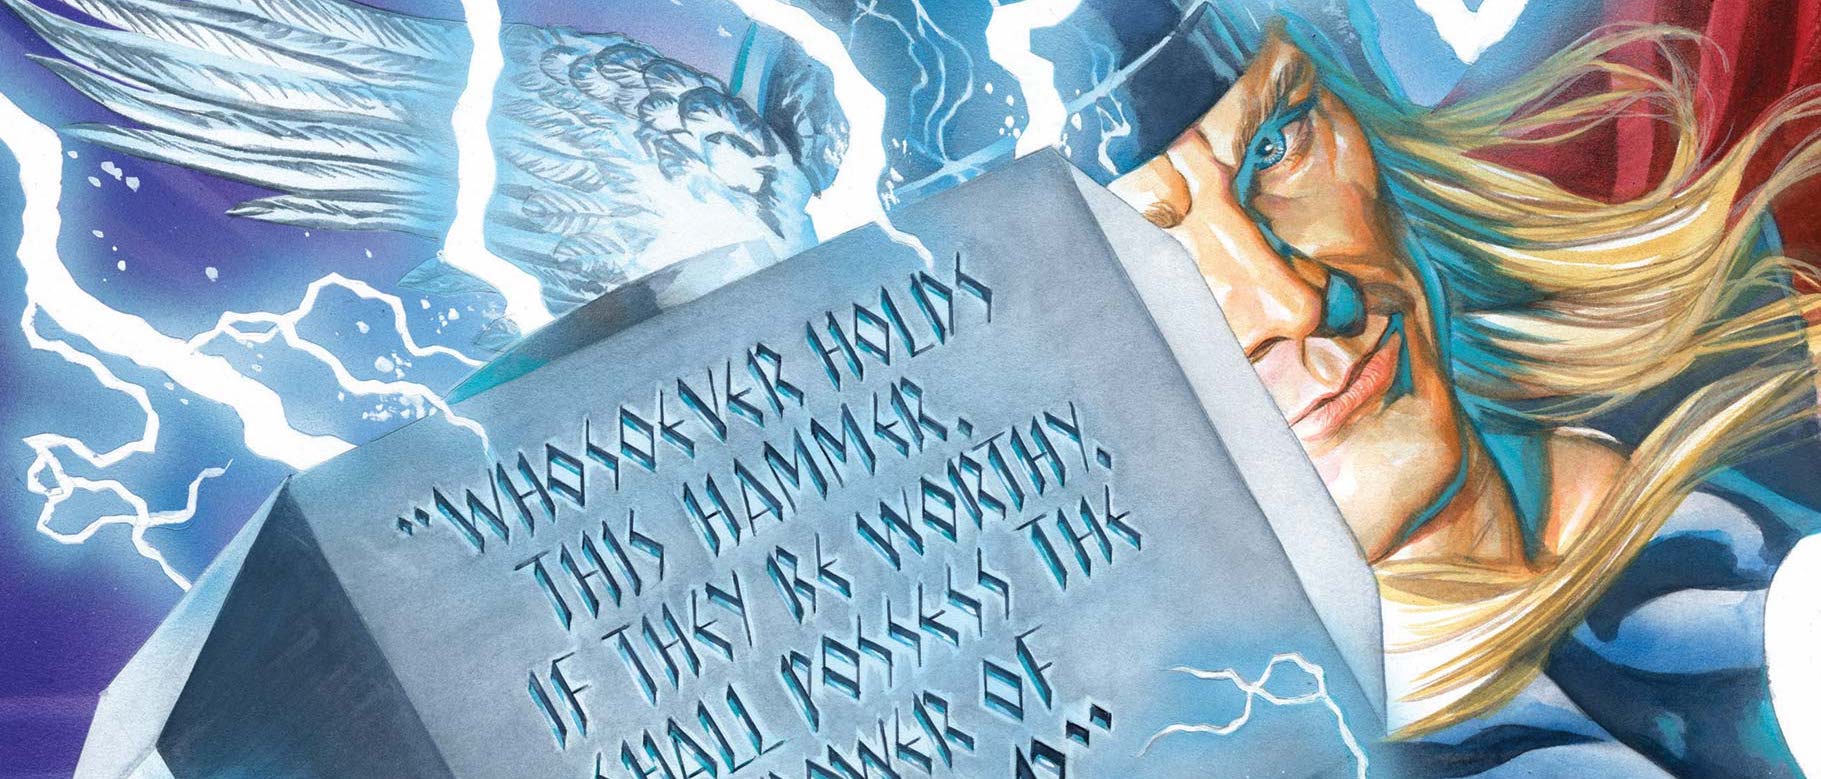 'The Immortal Thor' #4 is an exceptional Marvel comic